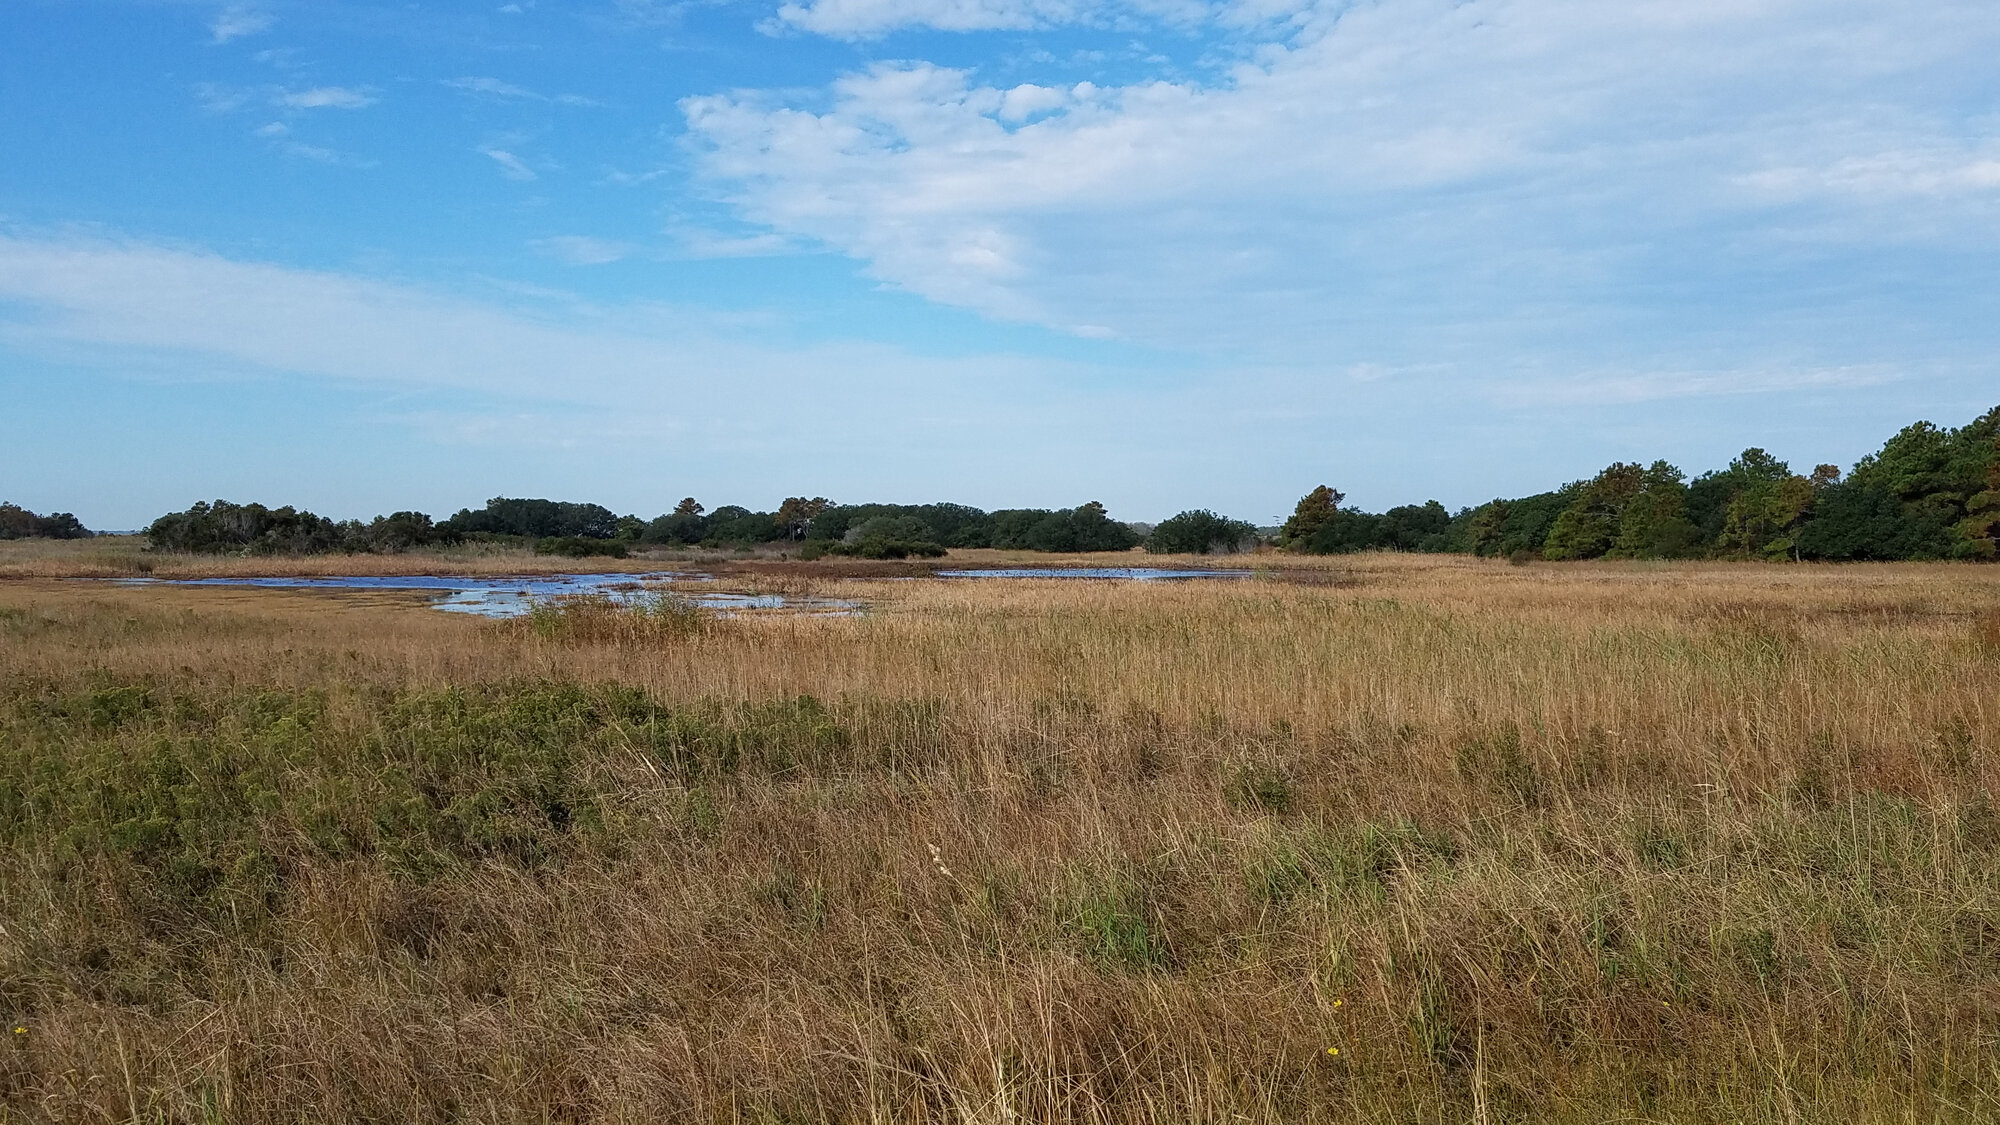  Back Bay NWR's C Pool (north end) on 26 Oct viewed from the East Dike before its closure after 31 Oct. 